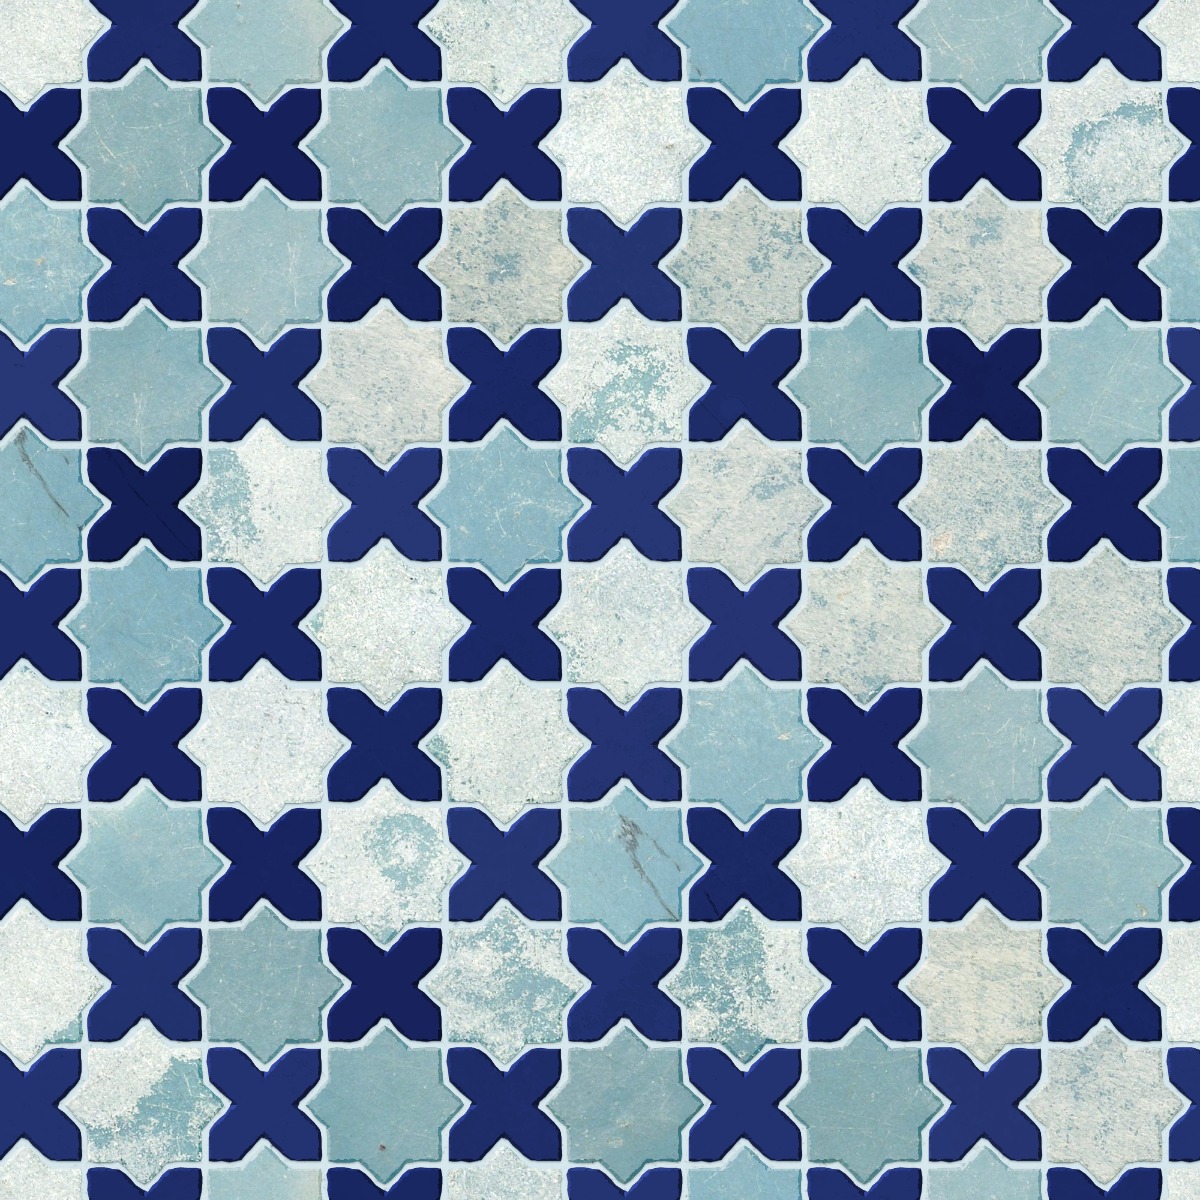 A seamless tile texture with blue tile tiles arranged in a Star and Cross pattern